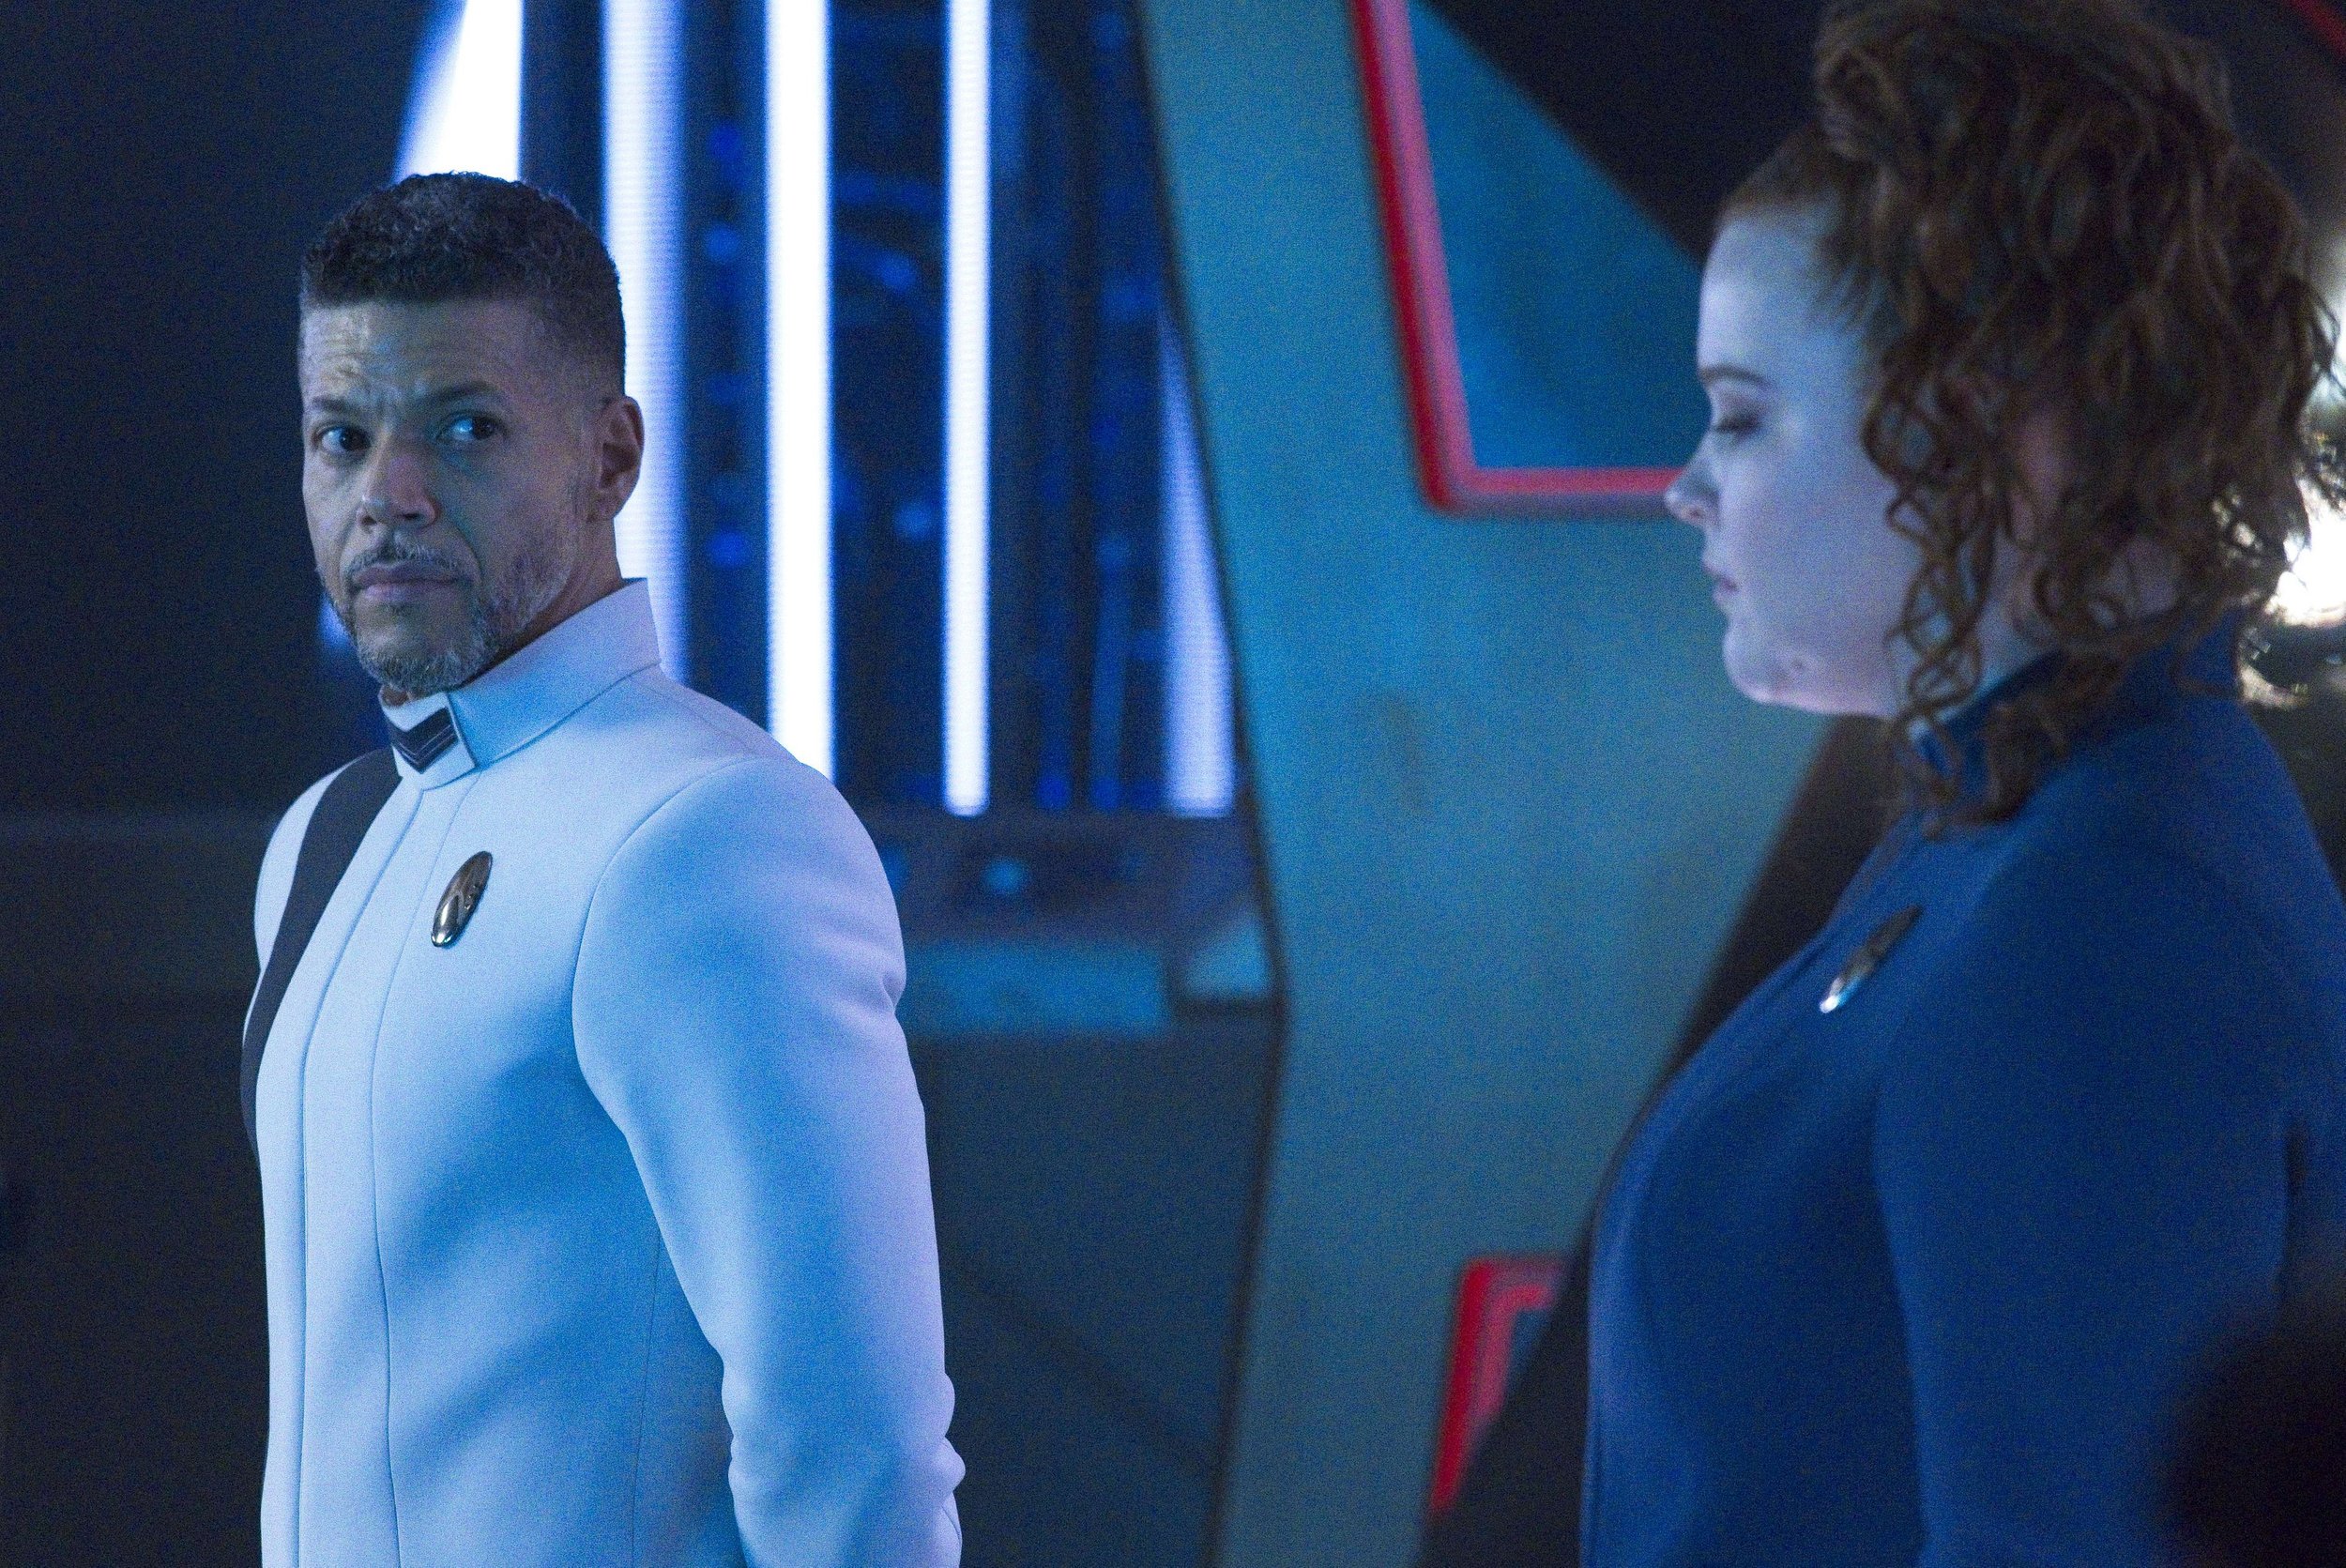   Pictured: Wilson Cruz as Culber and Mary Wiseman as Tilly of the Paramount+ original series STAR TREK: DISCOVERY. Photo Cr: Michael Gibson/ViacomCBS © 2021 ViacomCBS. All Rights Reserved.  